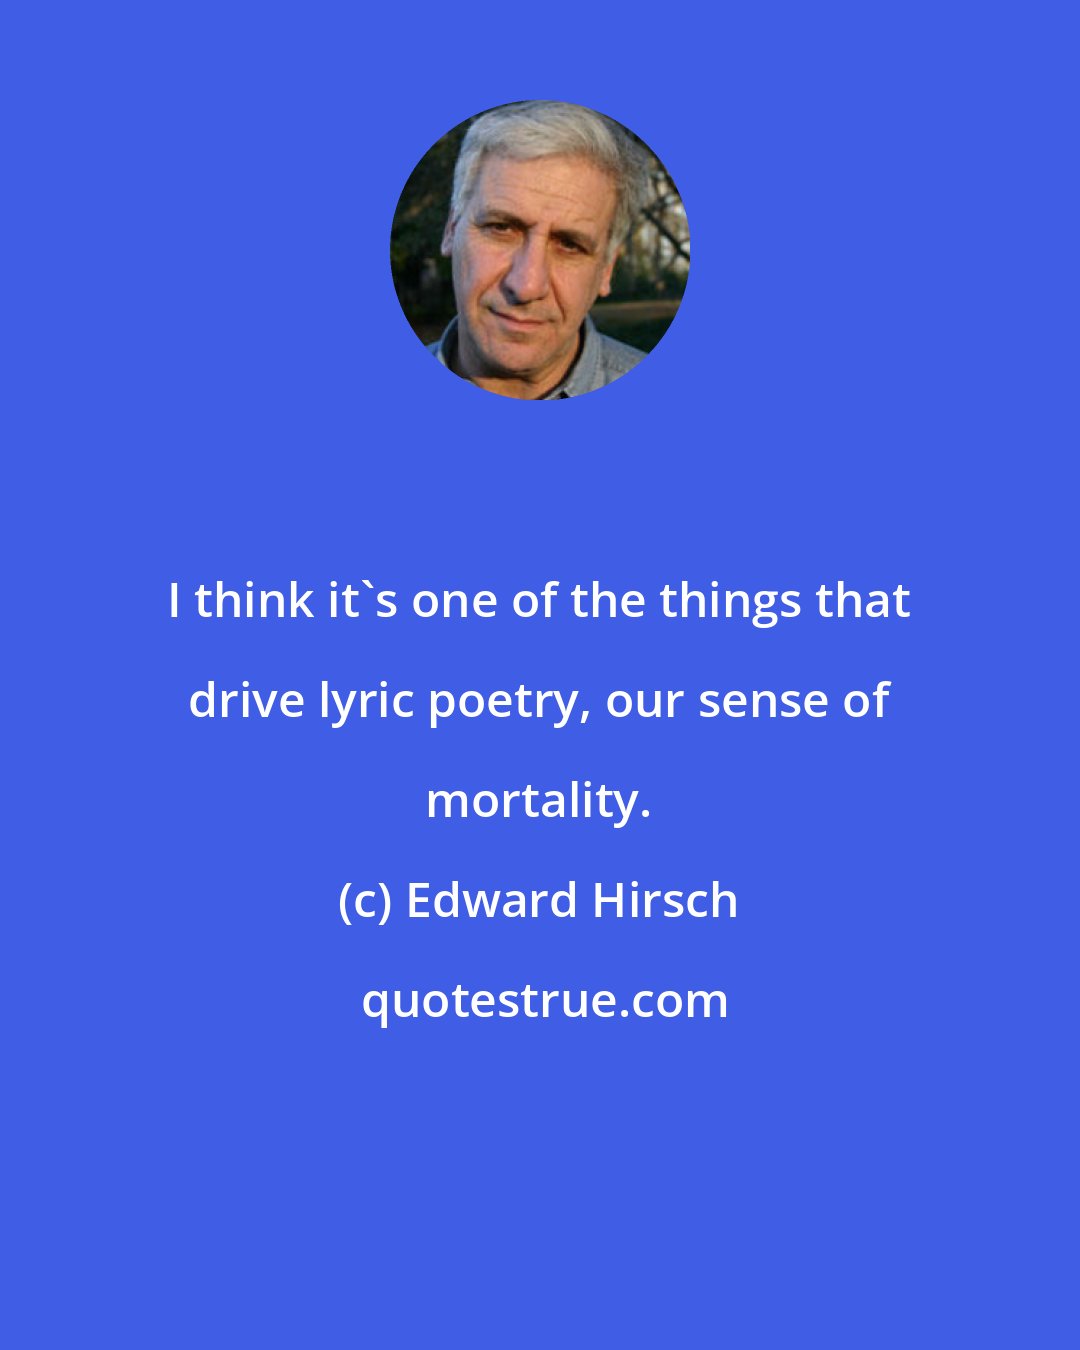 Edward Hirsch: I think it's one of the things that drive lyric poetry, our sense of mortality.